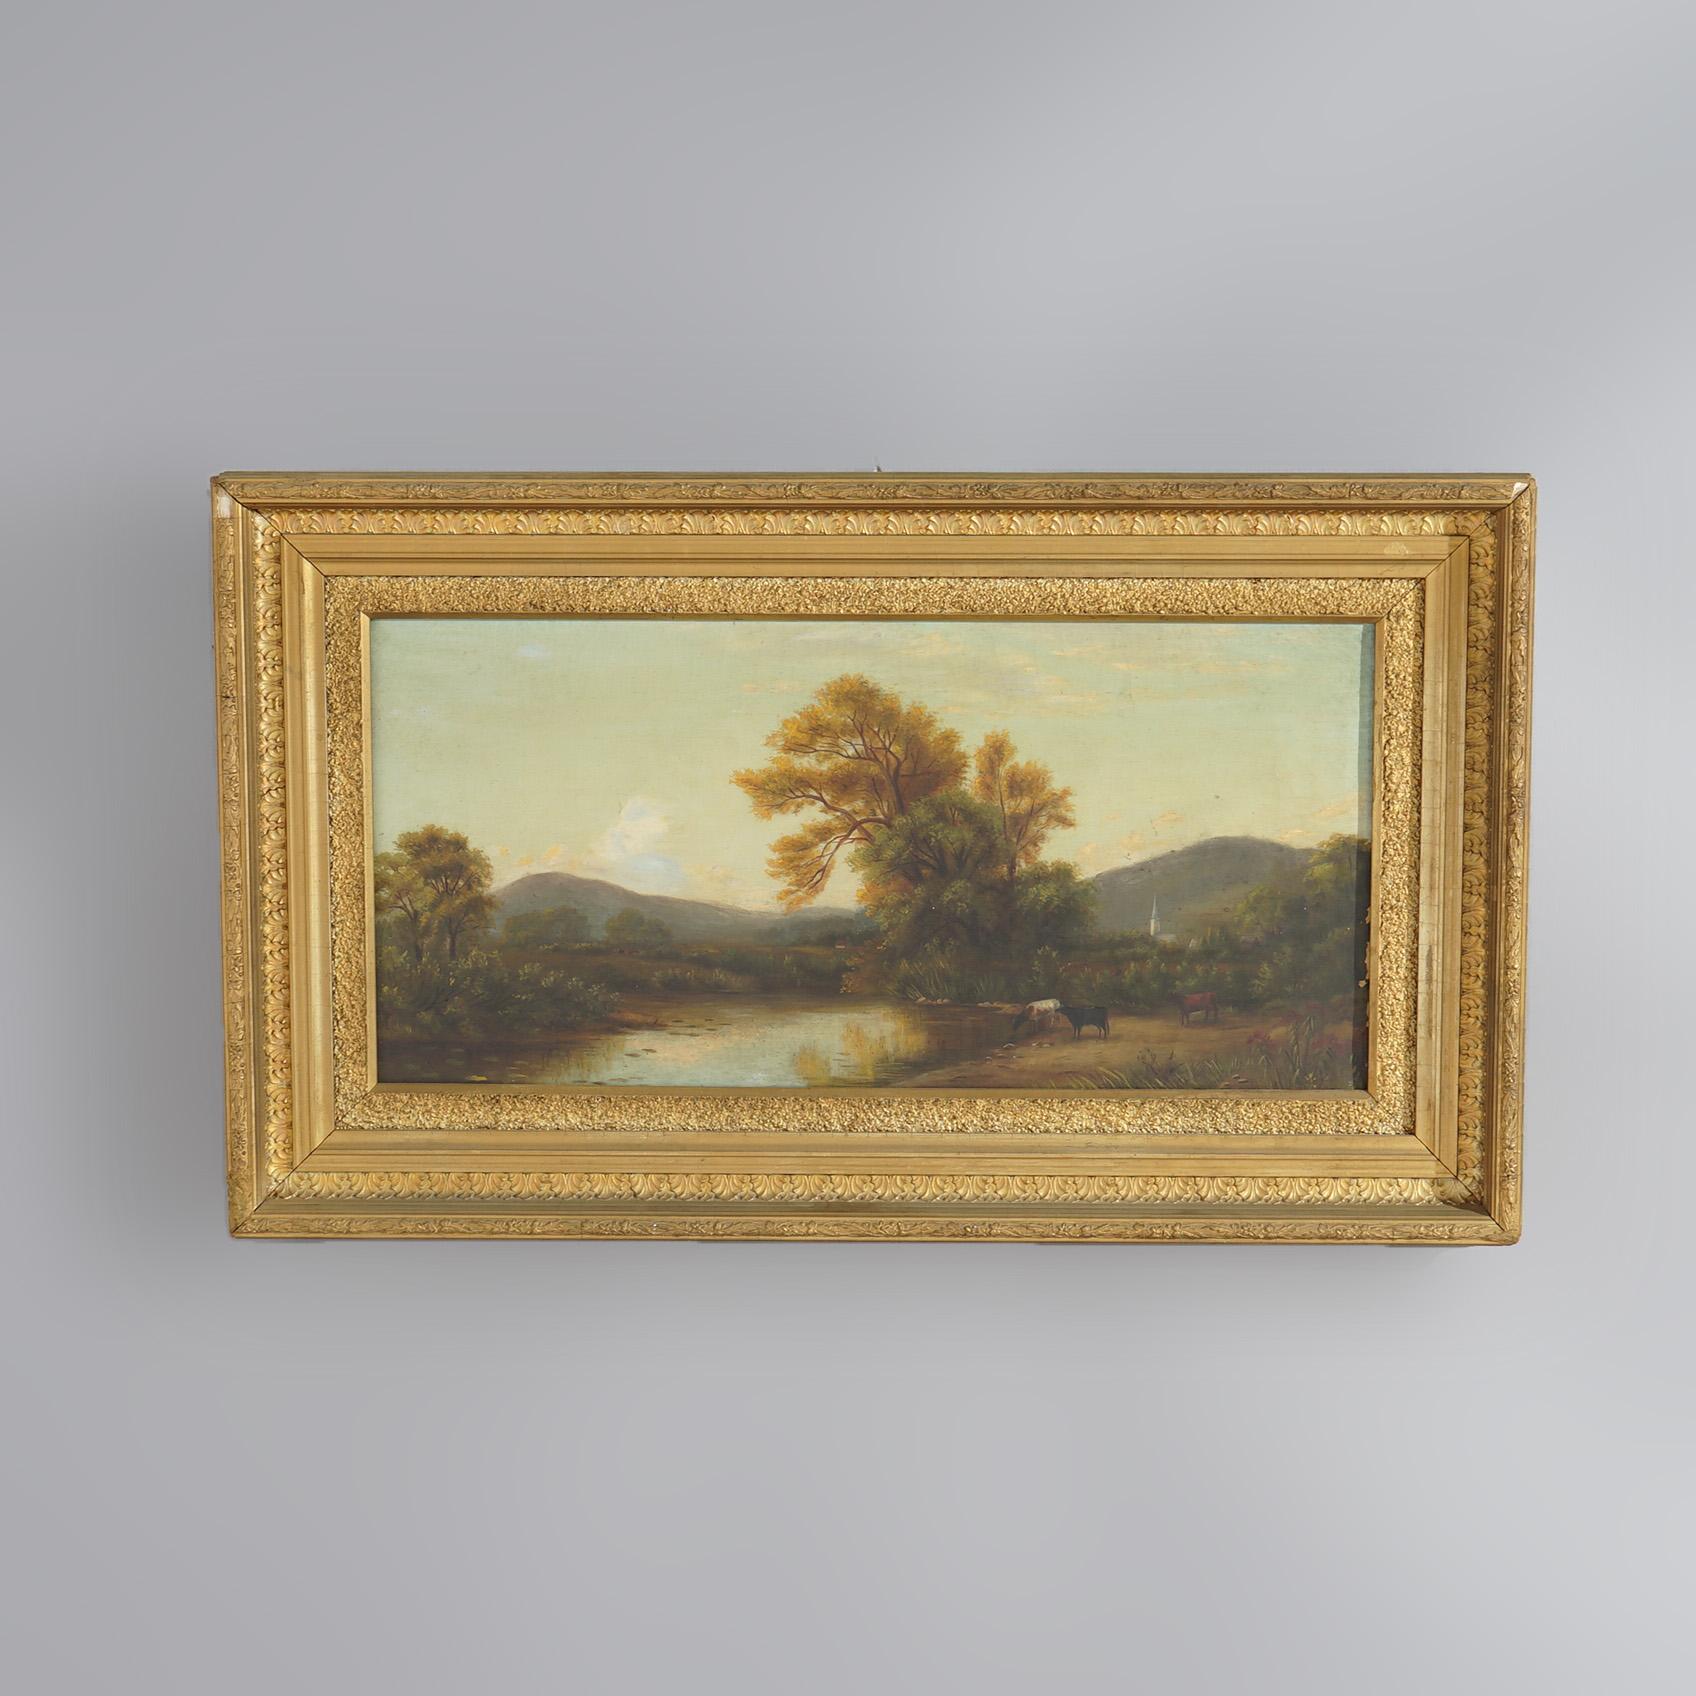 An antique Hudson River School painting offers oil on canvas landscape scene having cattle, stream, mountains and church steeple in the background, c1890

Measures - 19